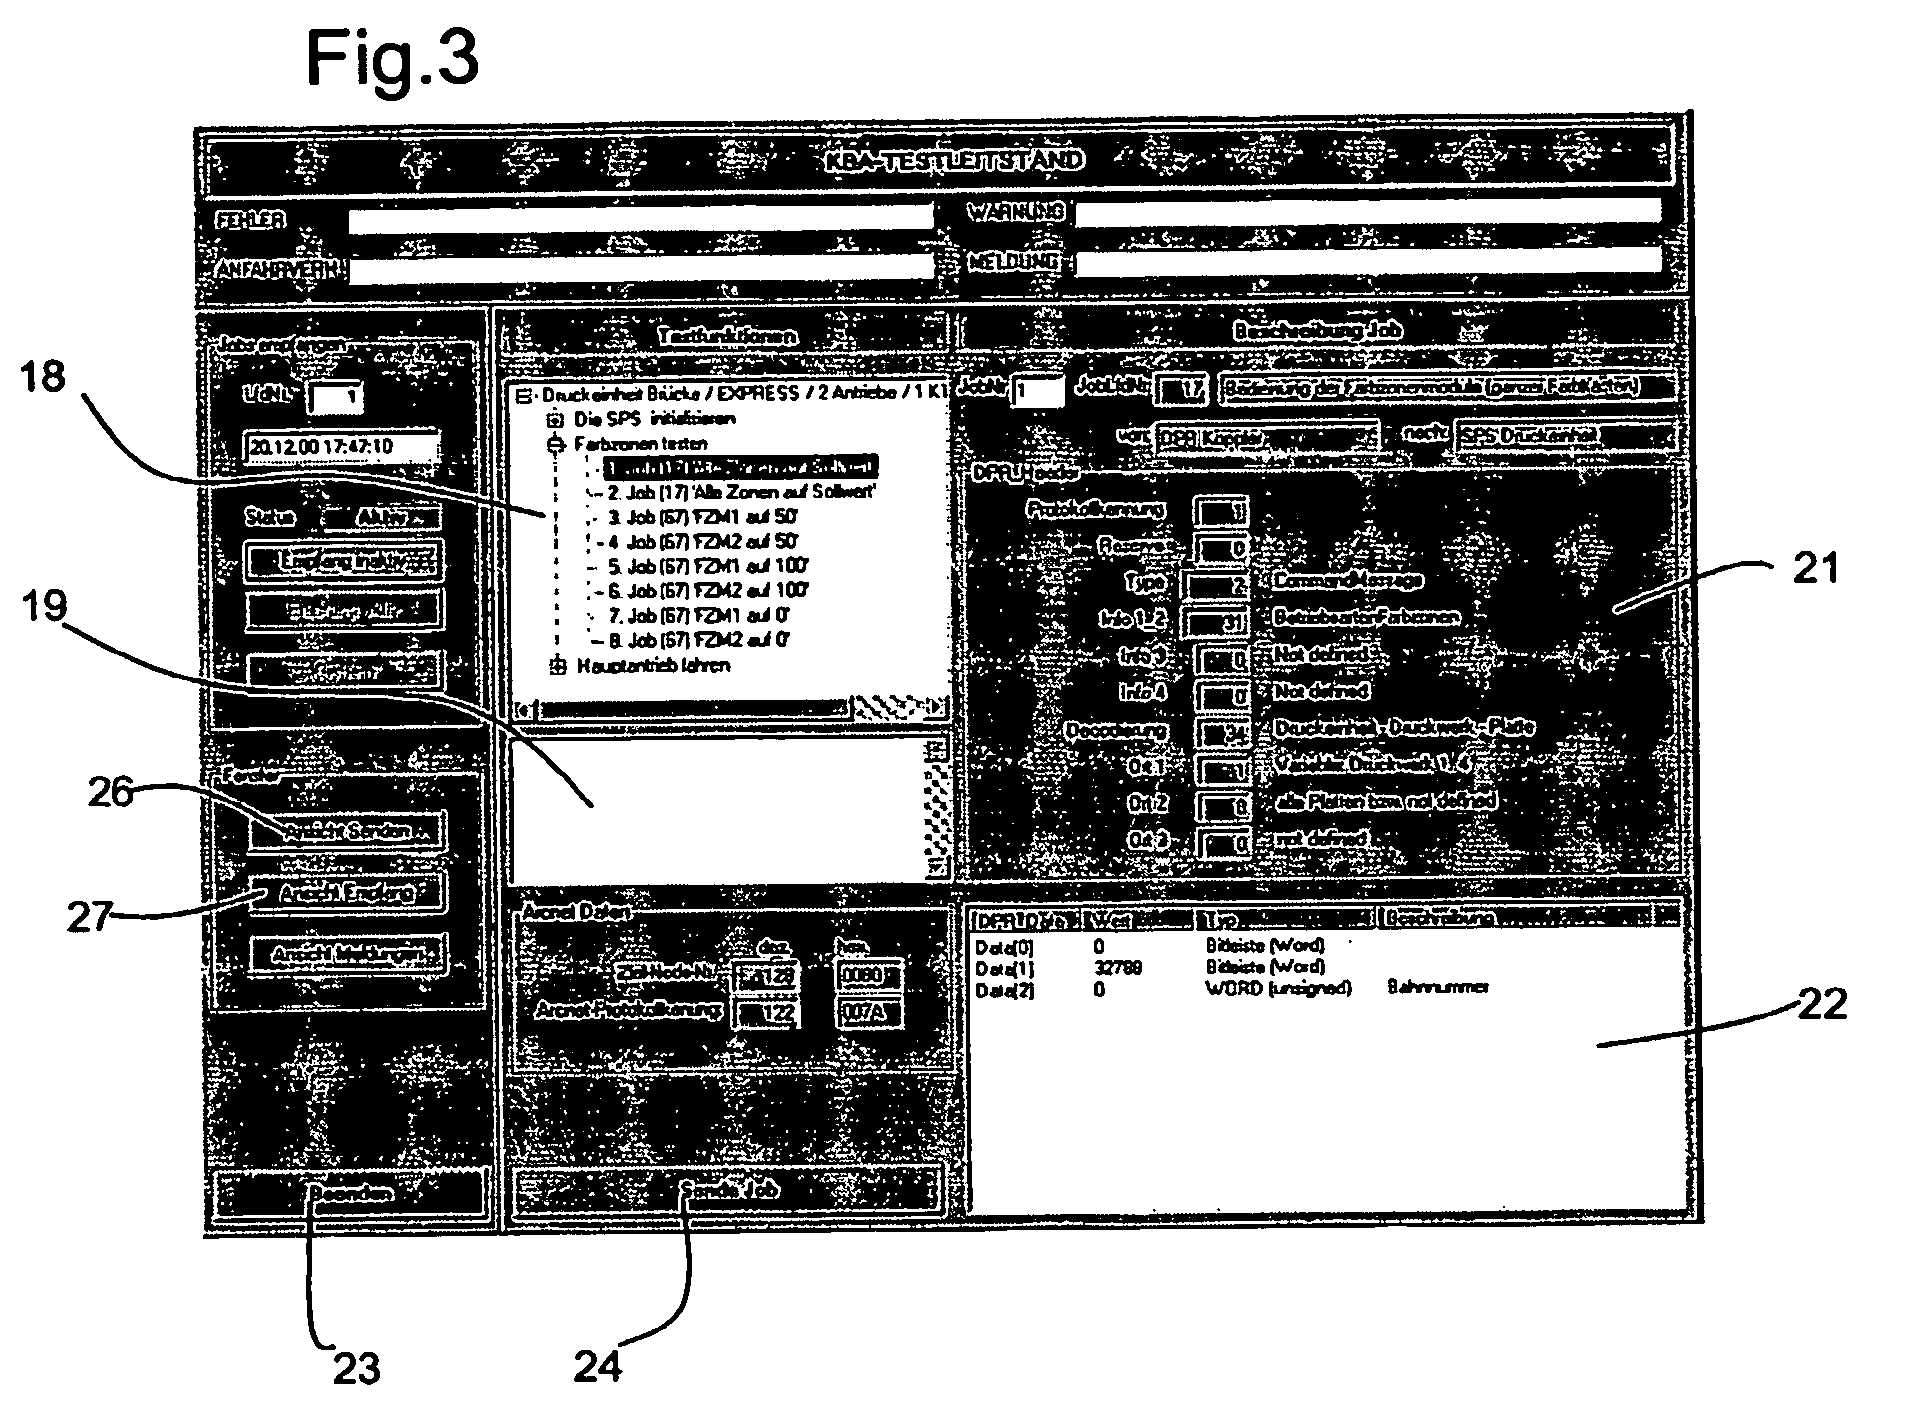 Method and Device for Carrying Out the Functional Check and Functional Checking of a Technical Unit